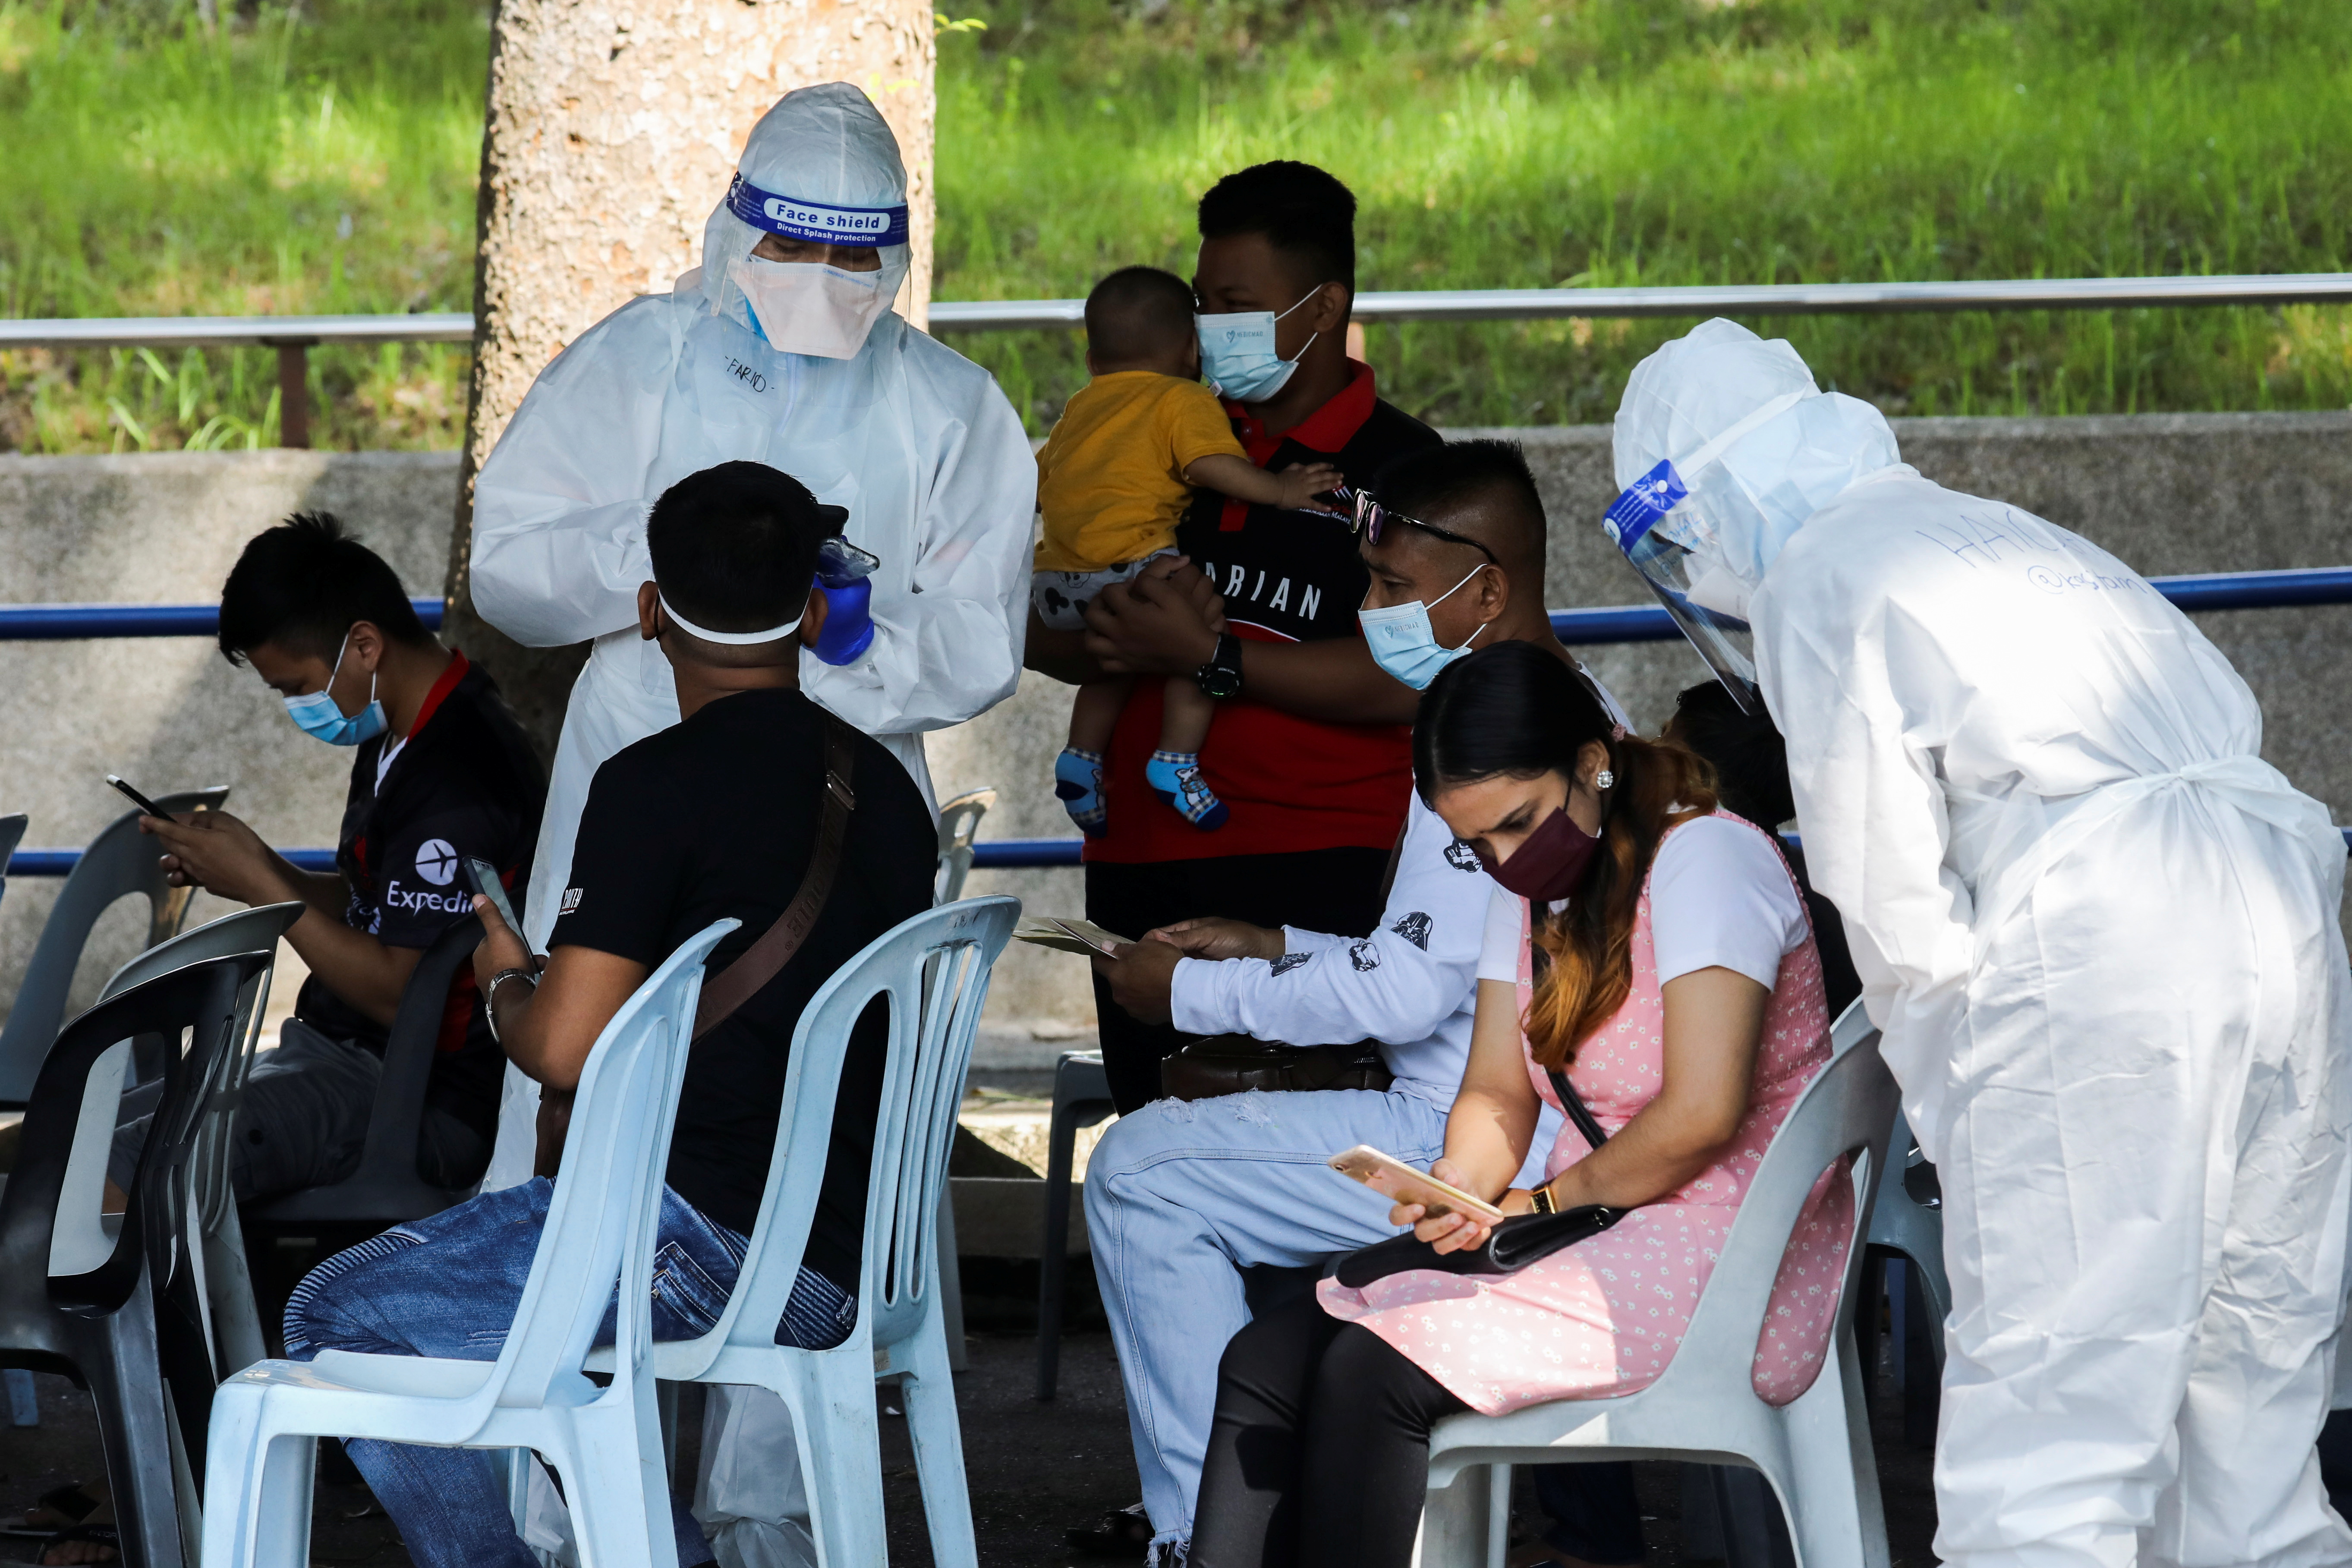 Medical workers speak to people outside a coronavirus disease (COVID-19) assessment centre, in Shah Alam